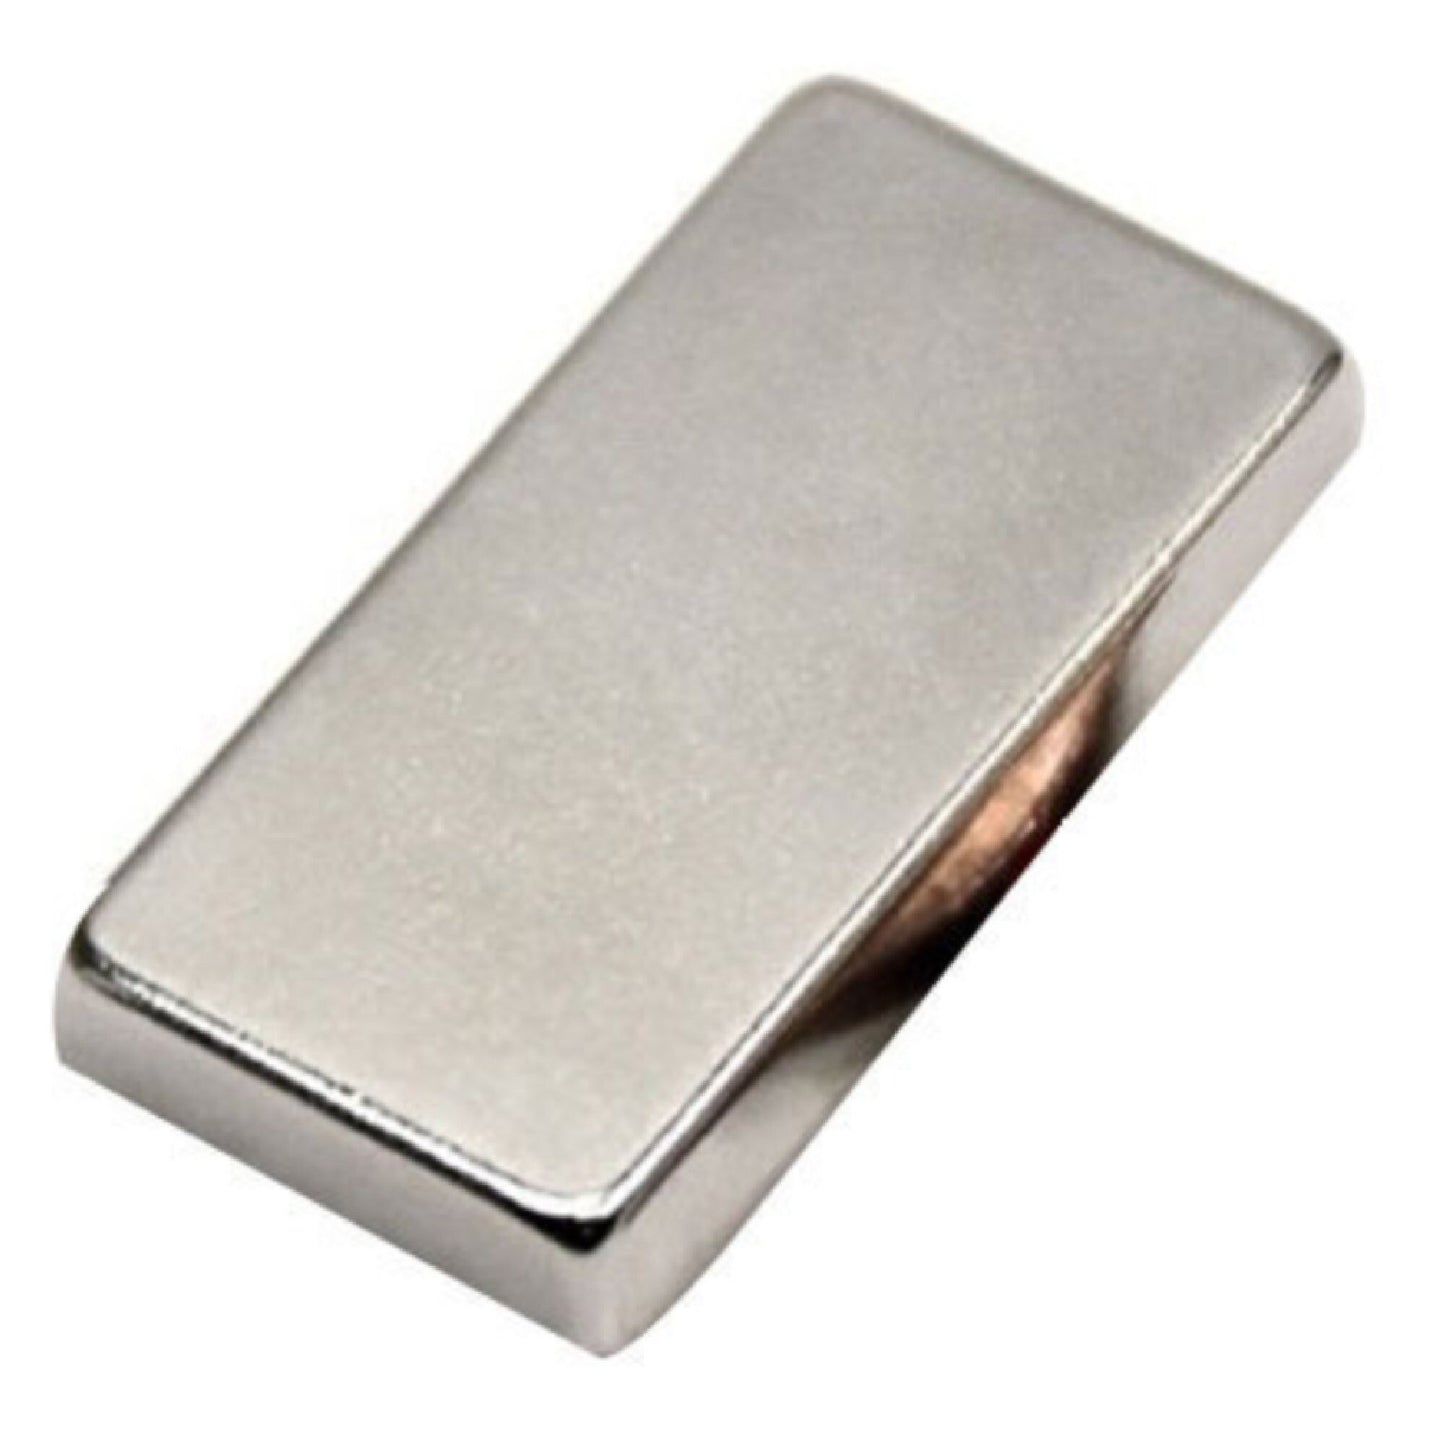 Rare Earth Magnet Neodymium N35 for Precious Metals Gold Silver Jewelry Spot Testing Scrap Bars Fake Coins Tester 999 Ring